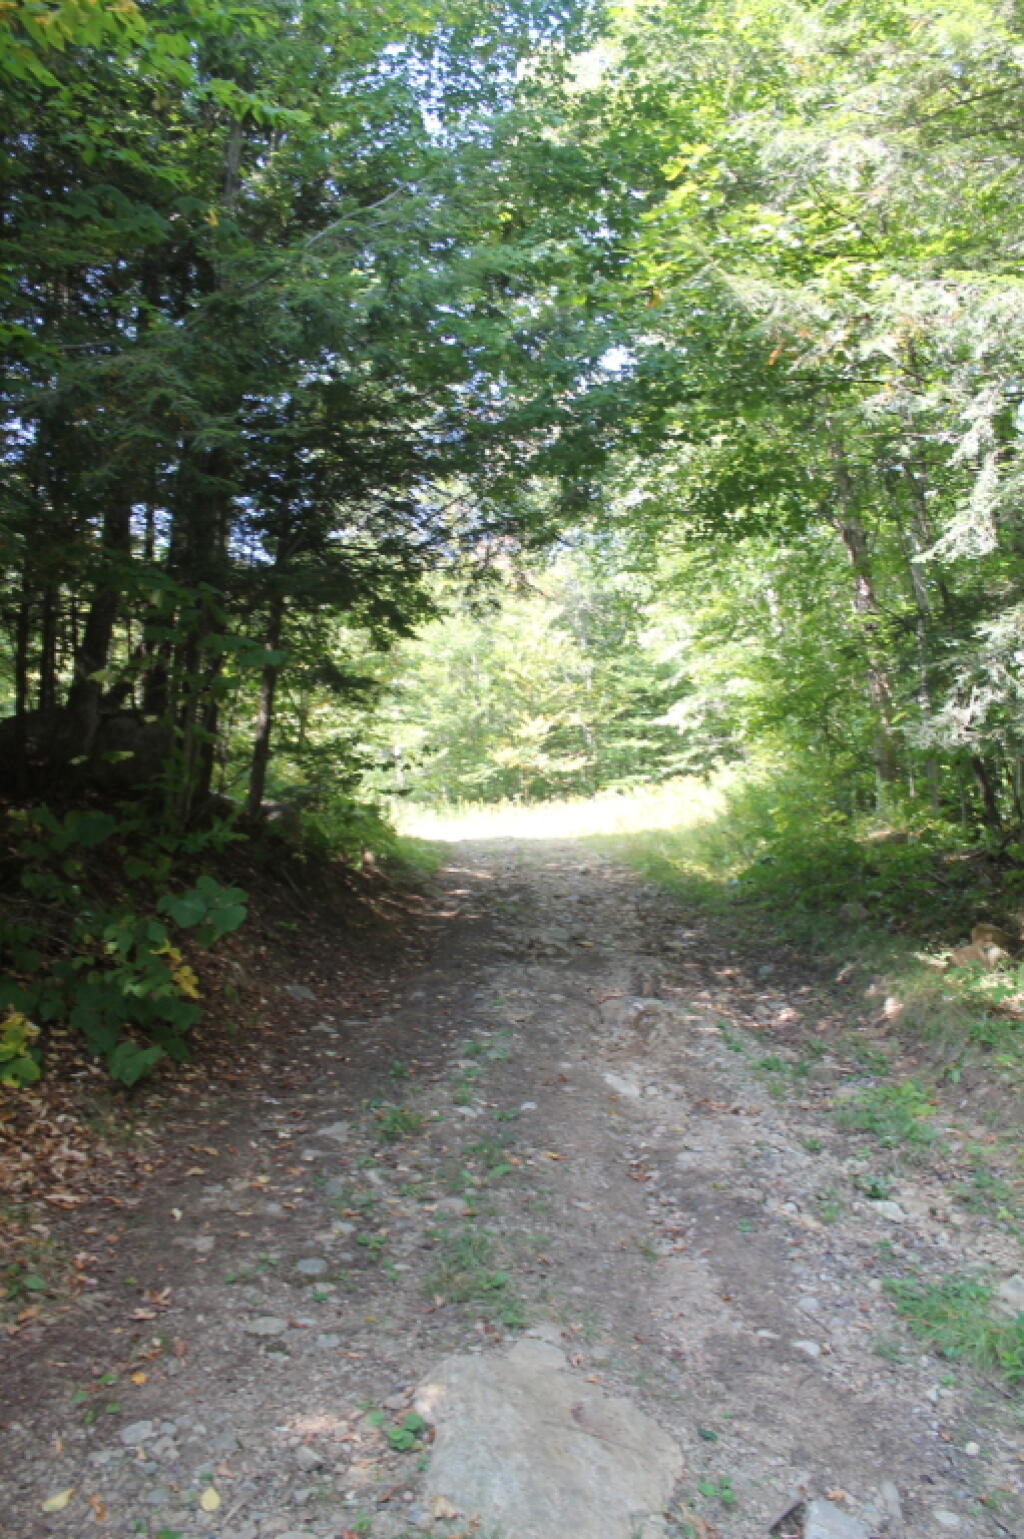  Rough Driveway to One of Campsites Along Old Route 8